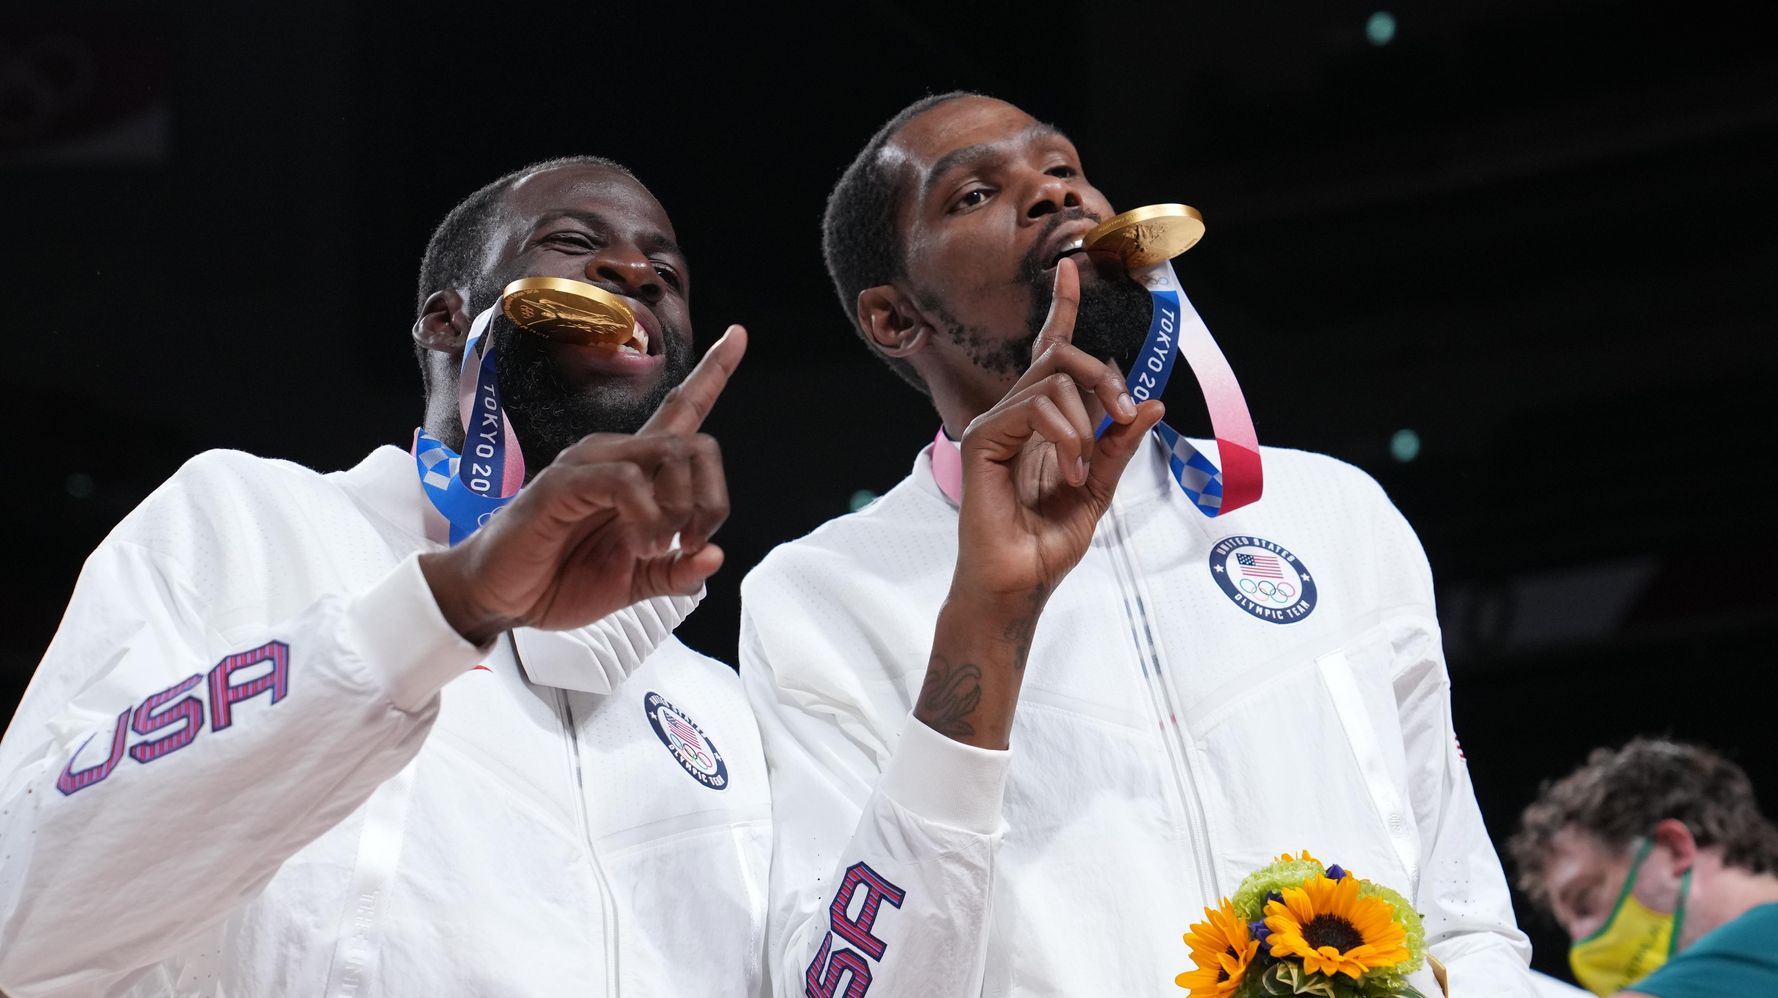 Fox News Shocked Olympic Basketball Team Celebrated Victory With Booze